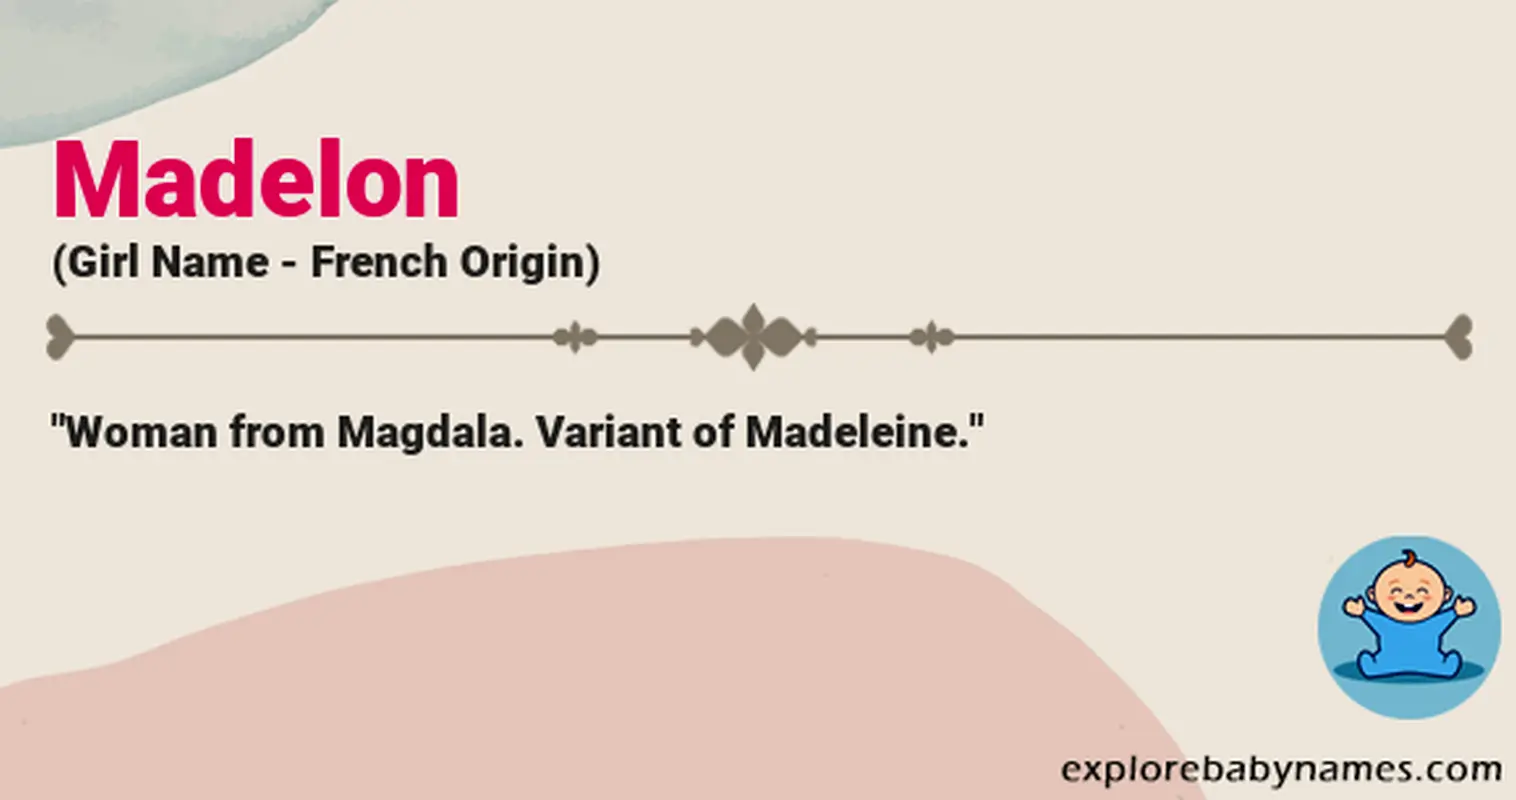 Meaning of Madelon